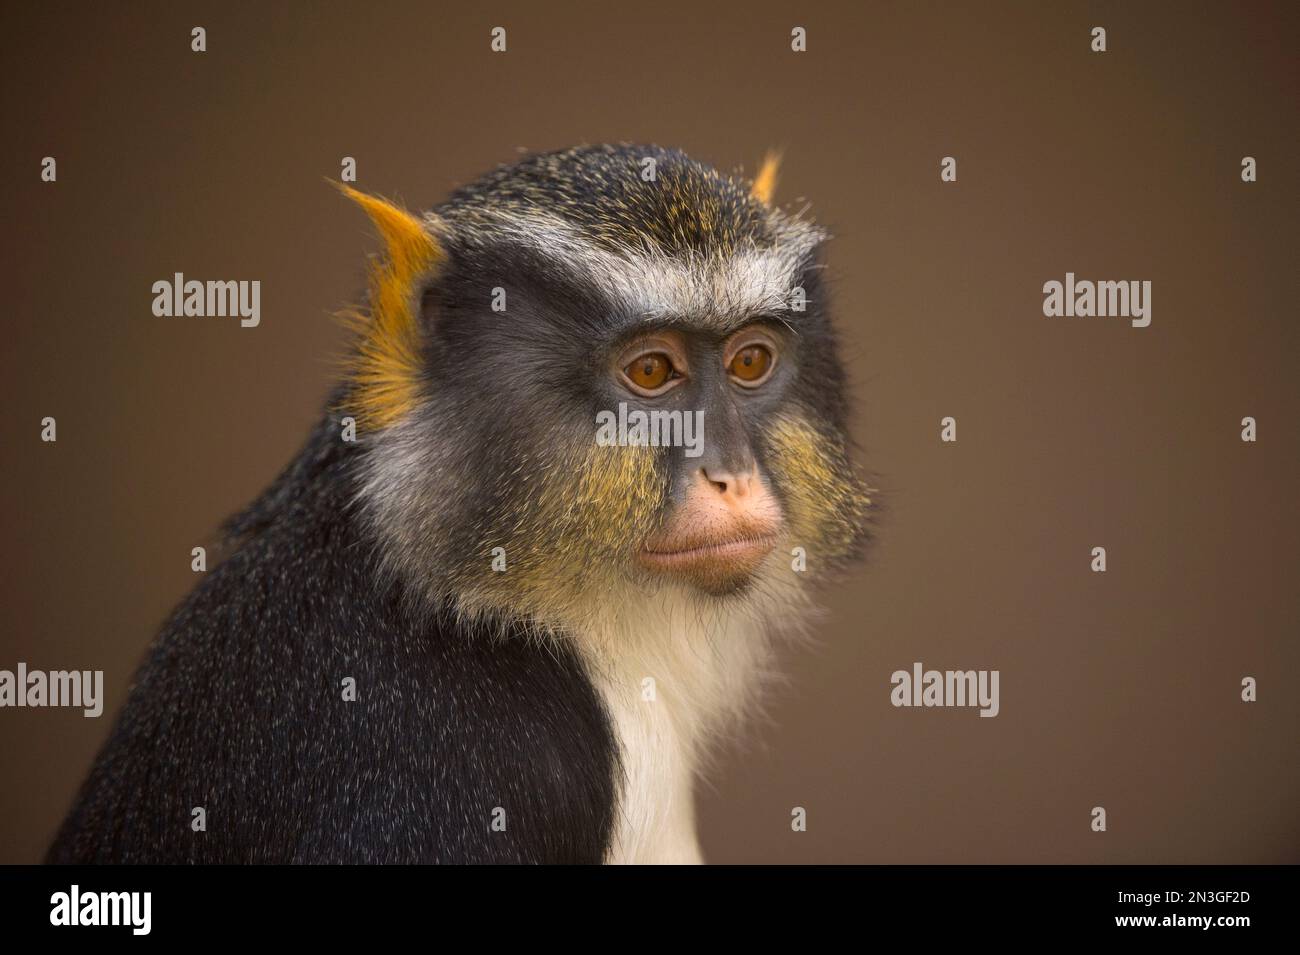 Close-up portrait of a Sykes' monkey (Cercopithecus albogularis) against a brown background; Colorado Springs, Colorado, United States of America Stock Photo